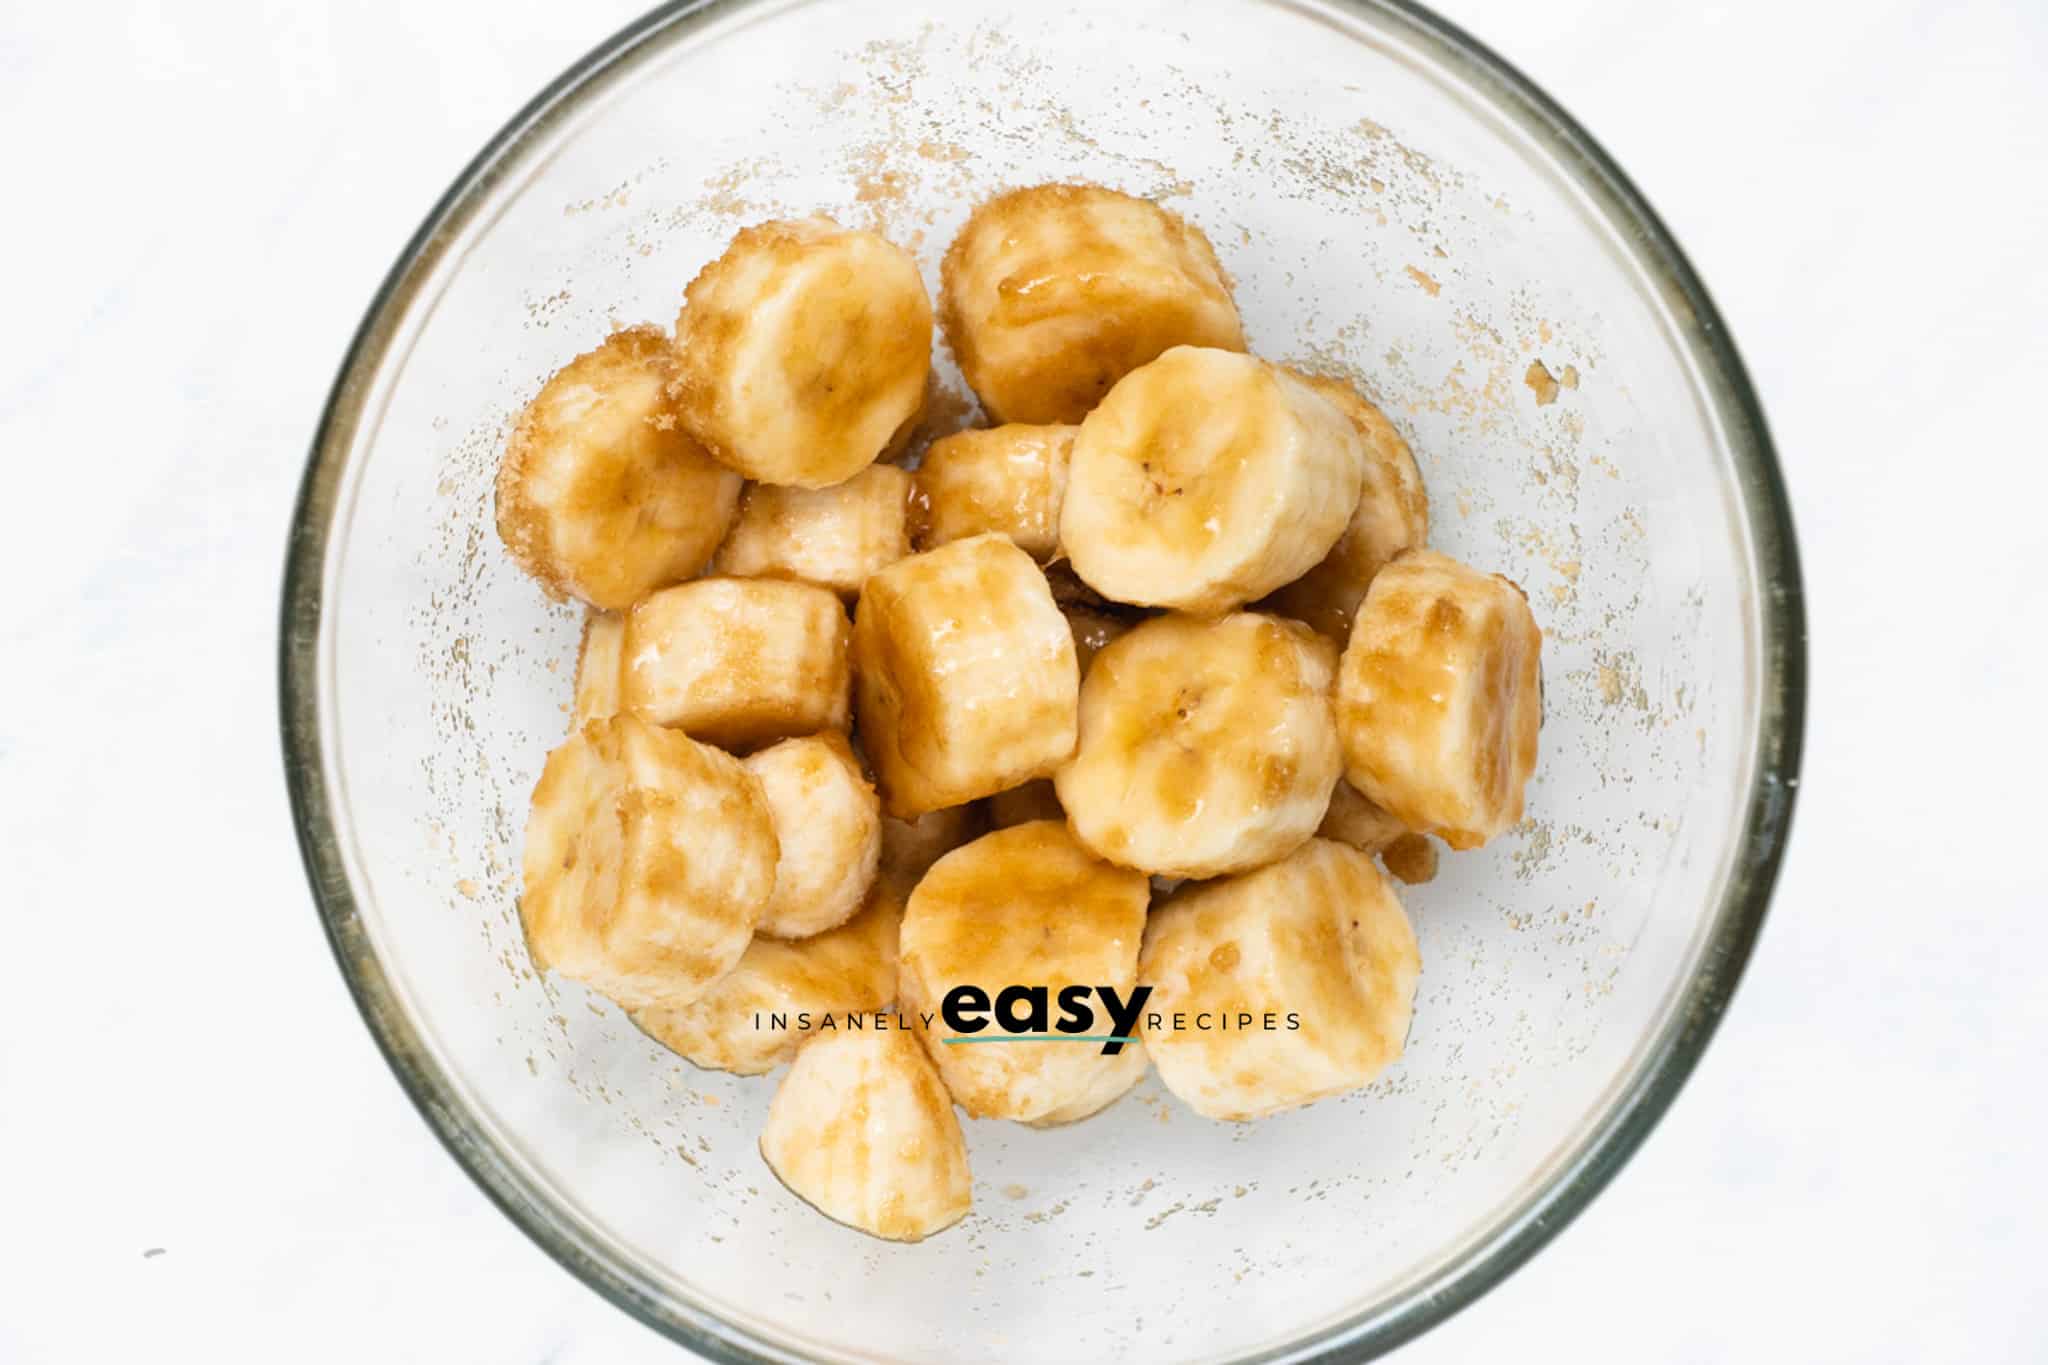 Top view photo of sliced bananas in a glass bowl, tossed in brown sugar.